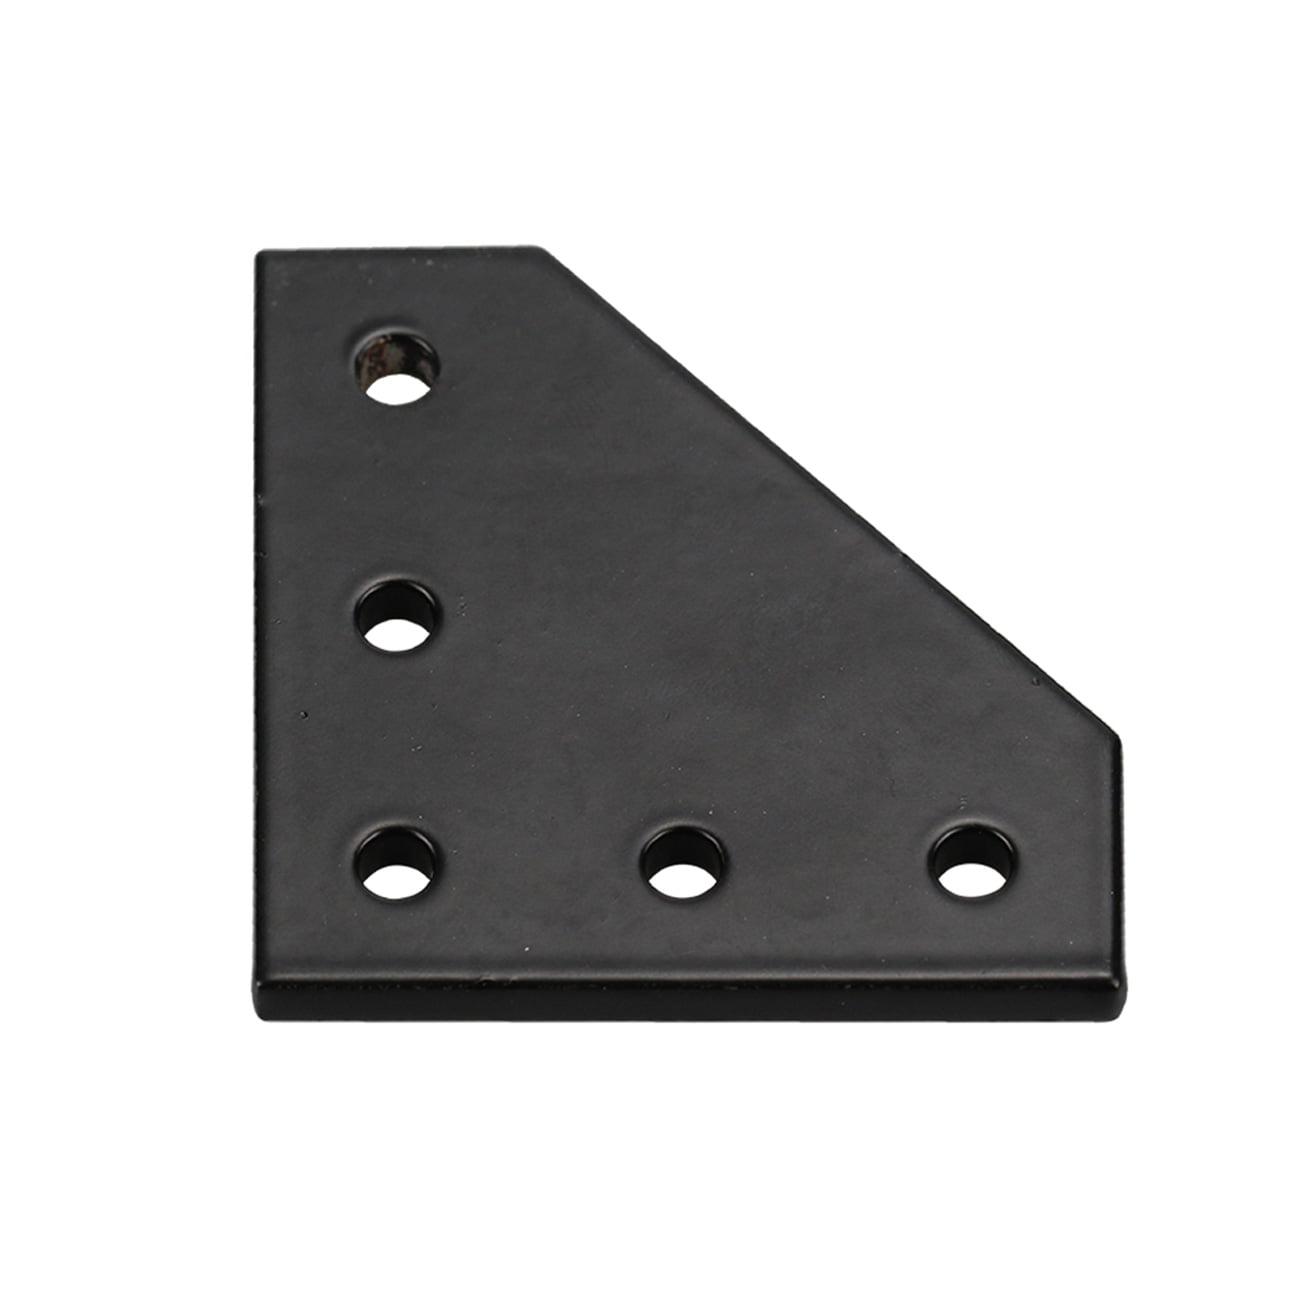 5 Holes 90°Joint Board Corner Angle Bracket For 2020 Series 3D CNC Printer Parts 